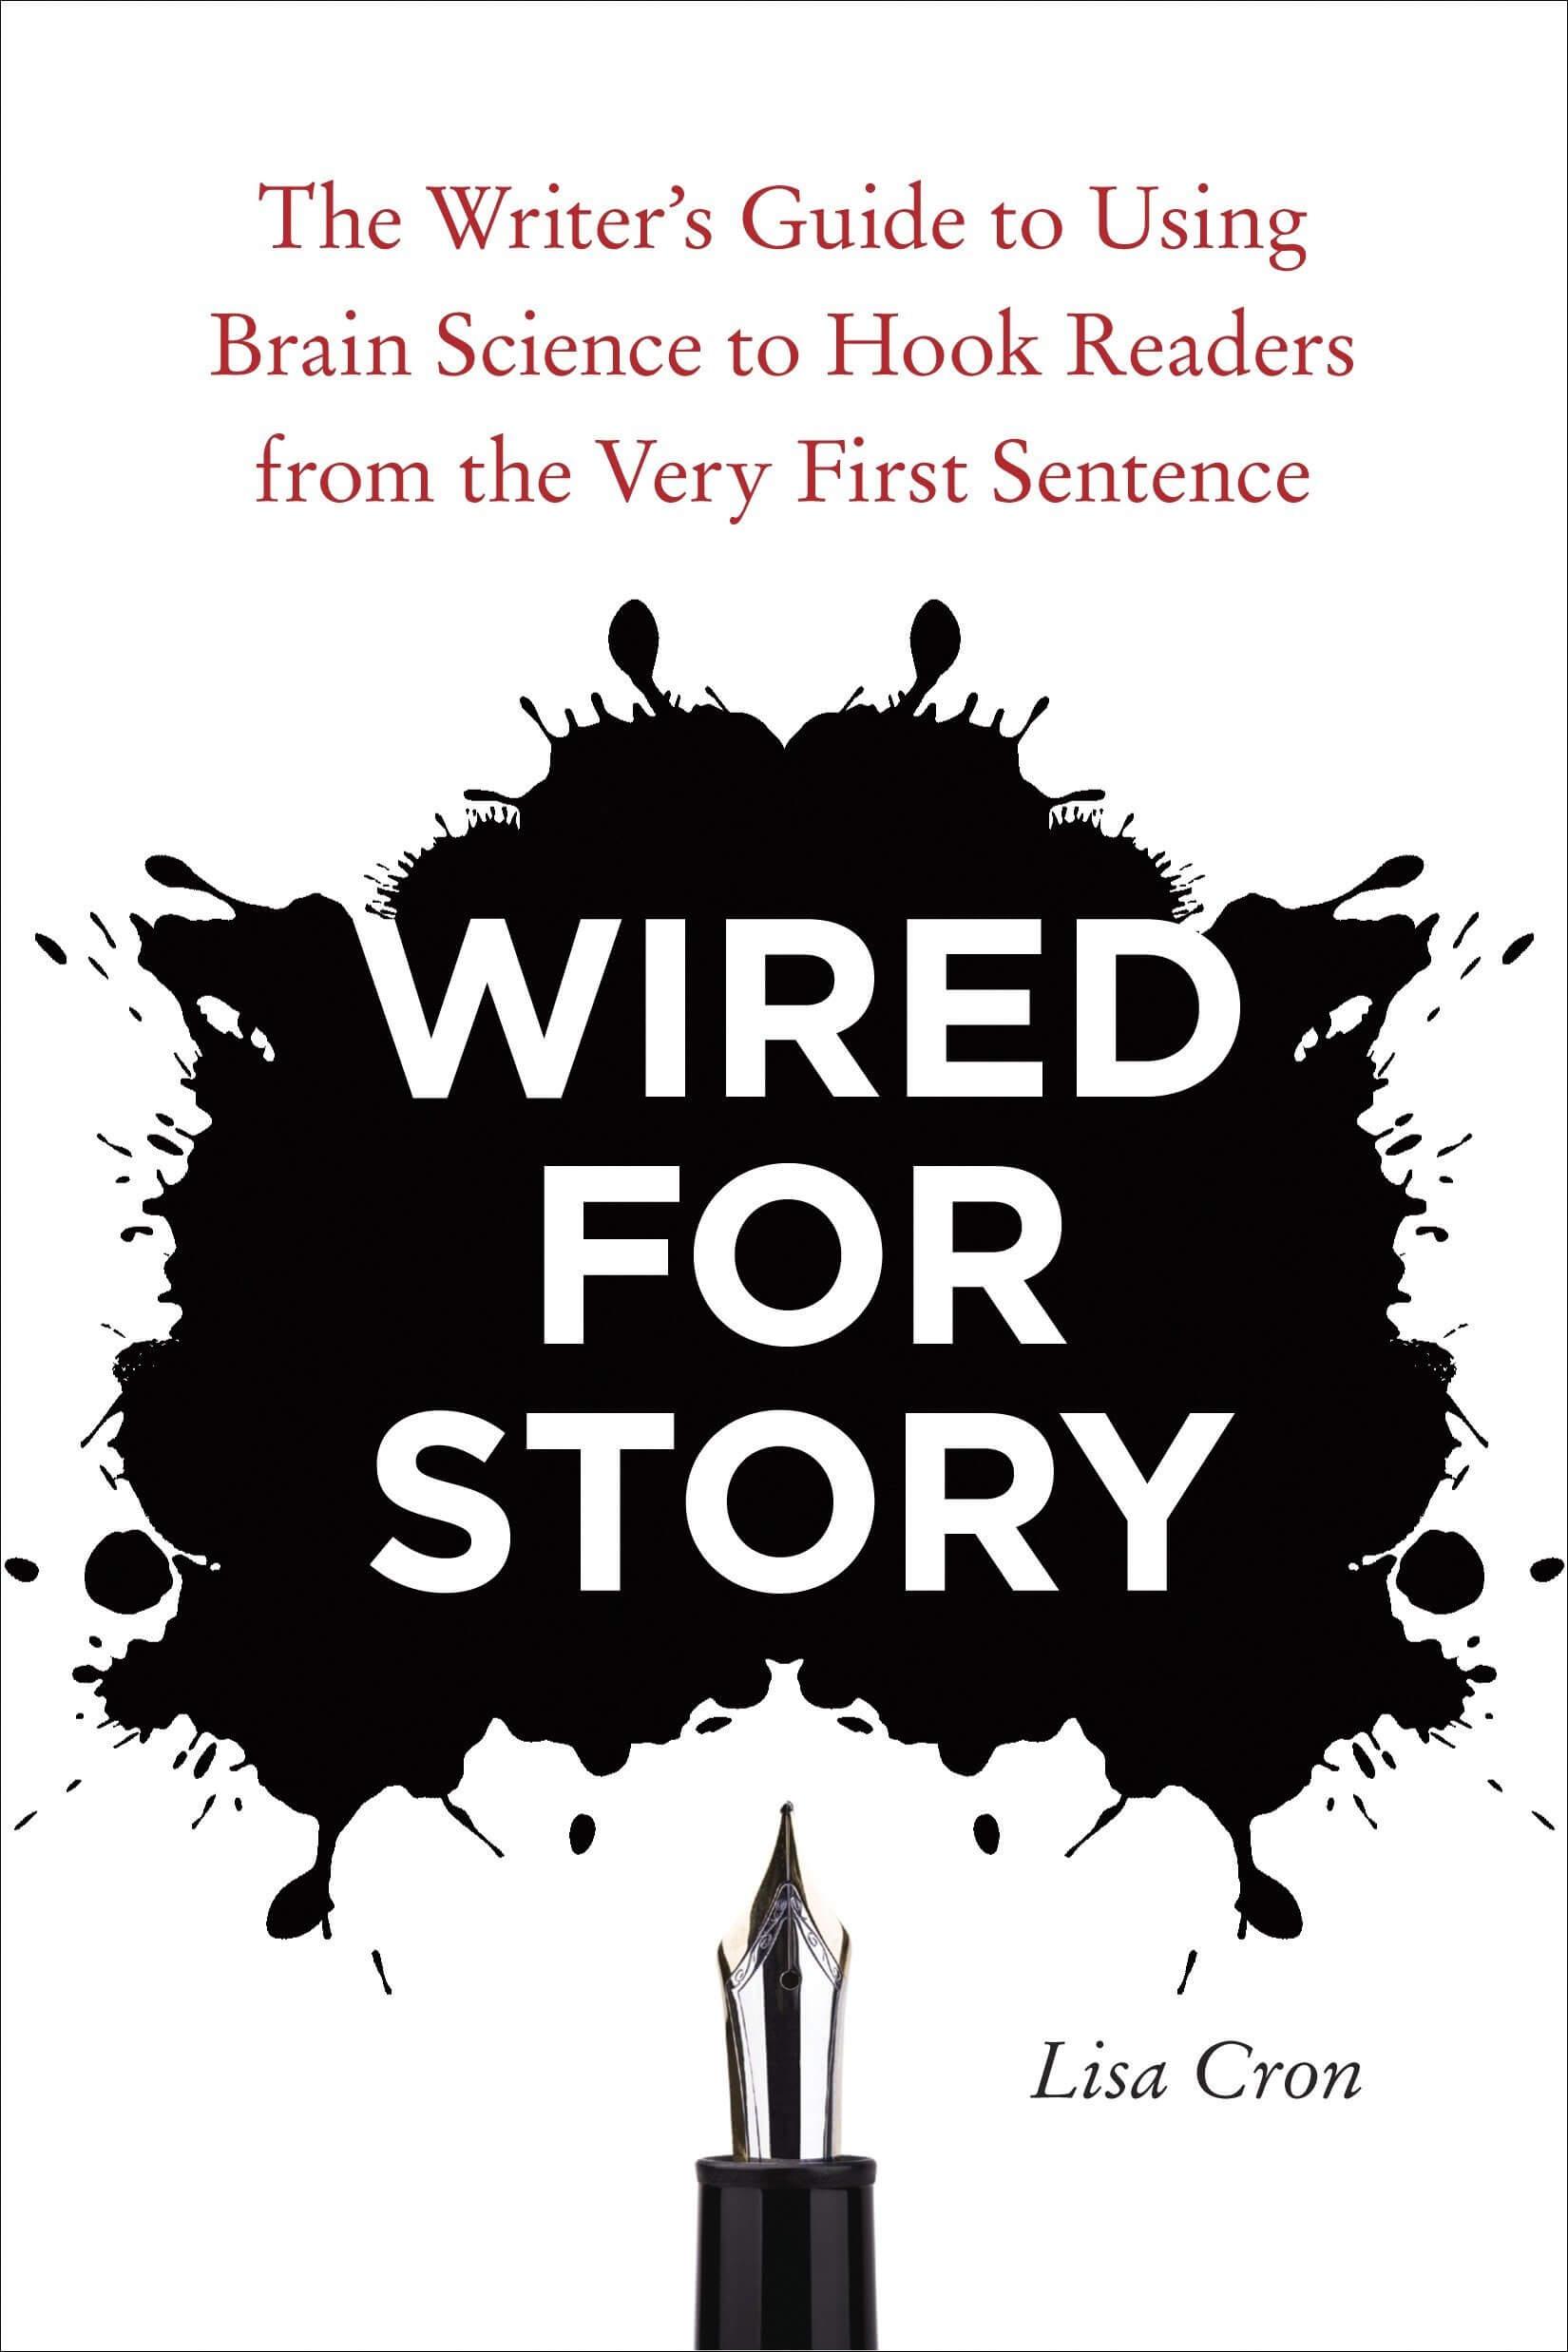 book cover of Lisa Cron's "Wired For Story"